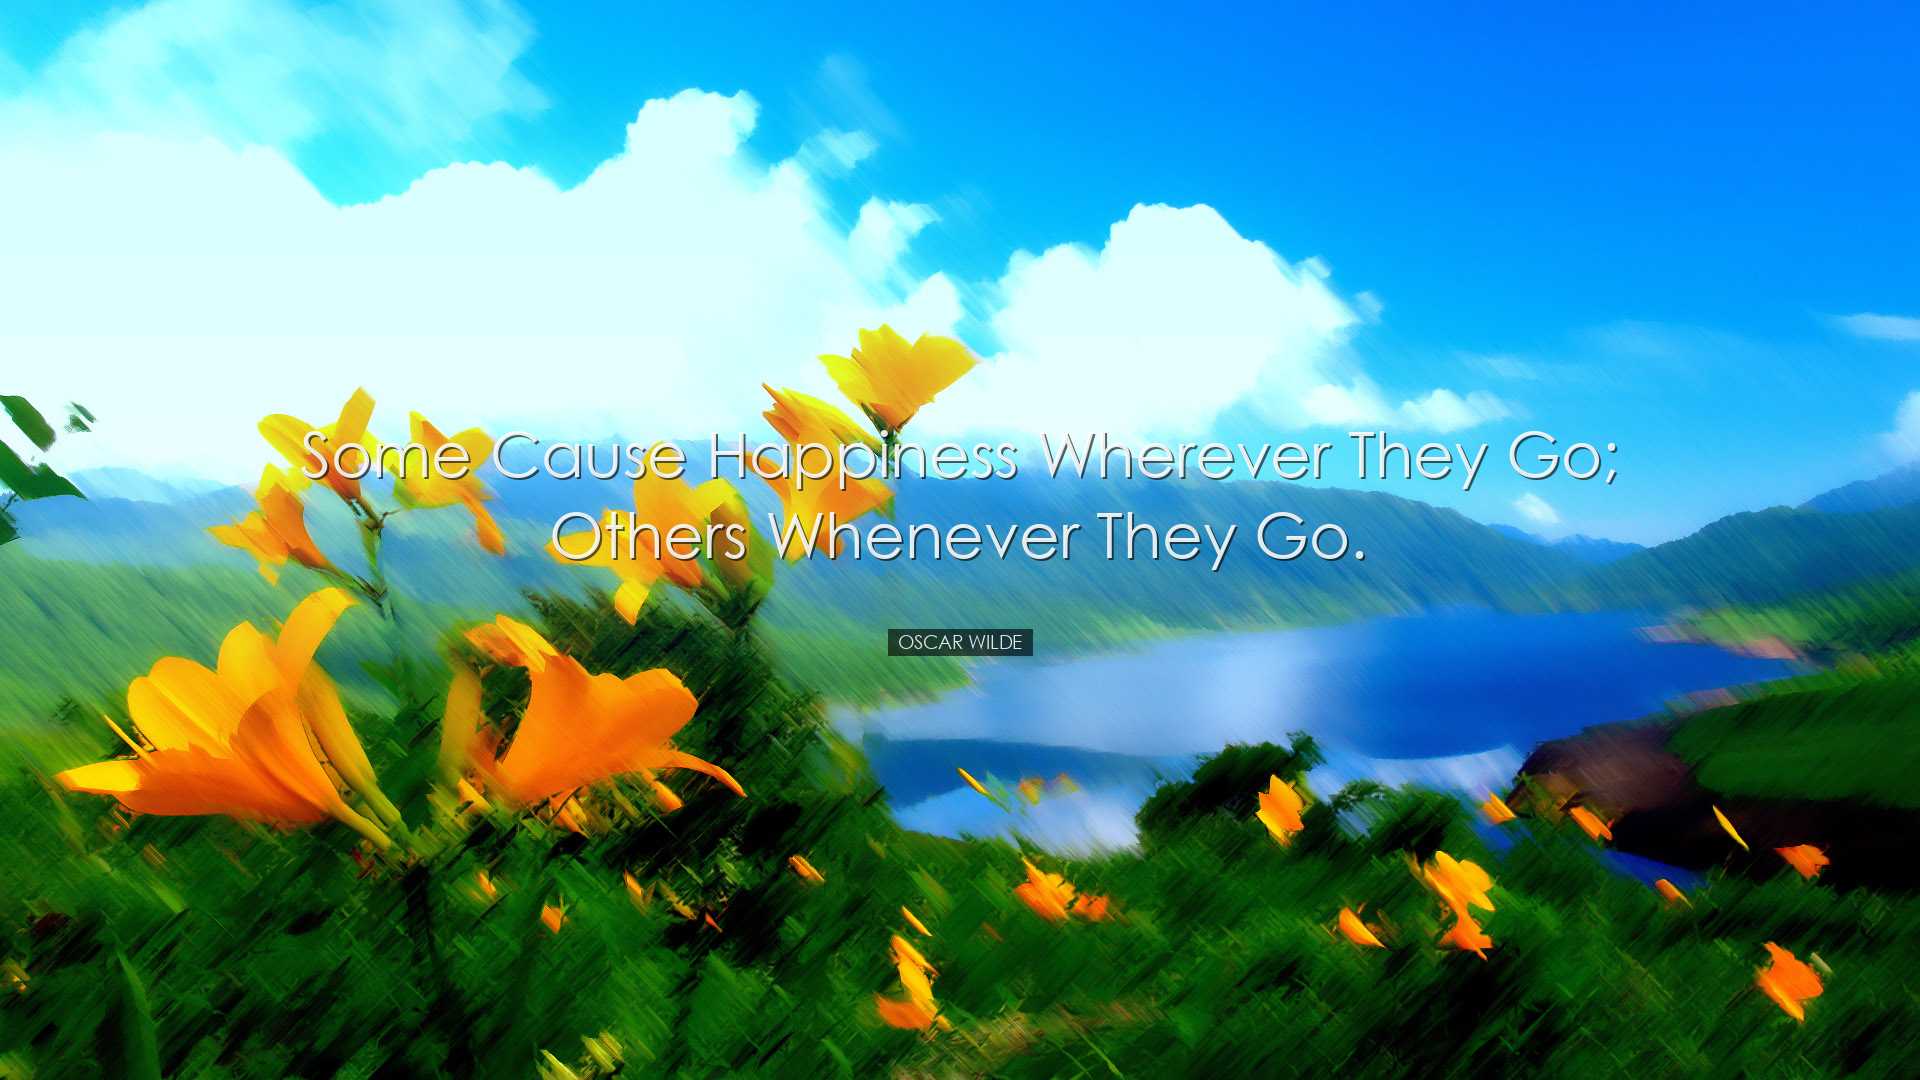 Some cause happiness wherever they go; others whenever they go. -